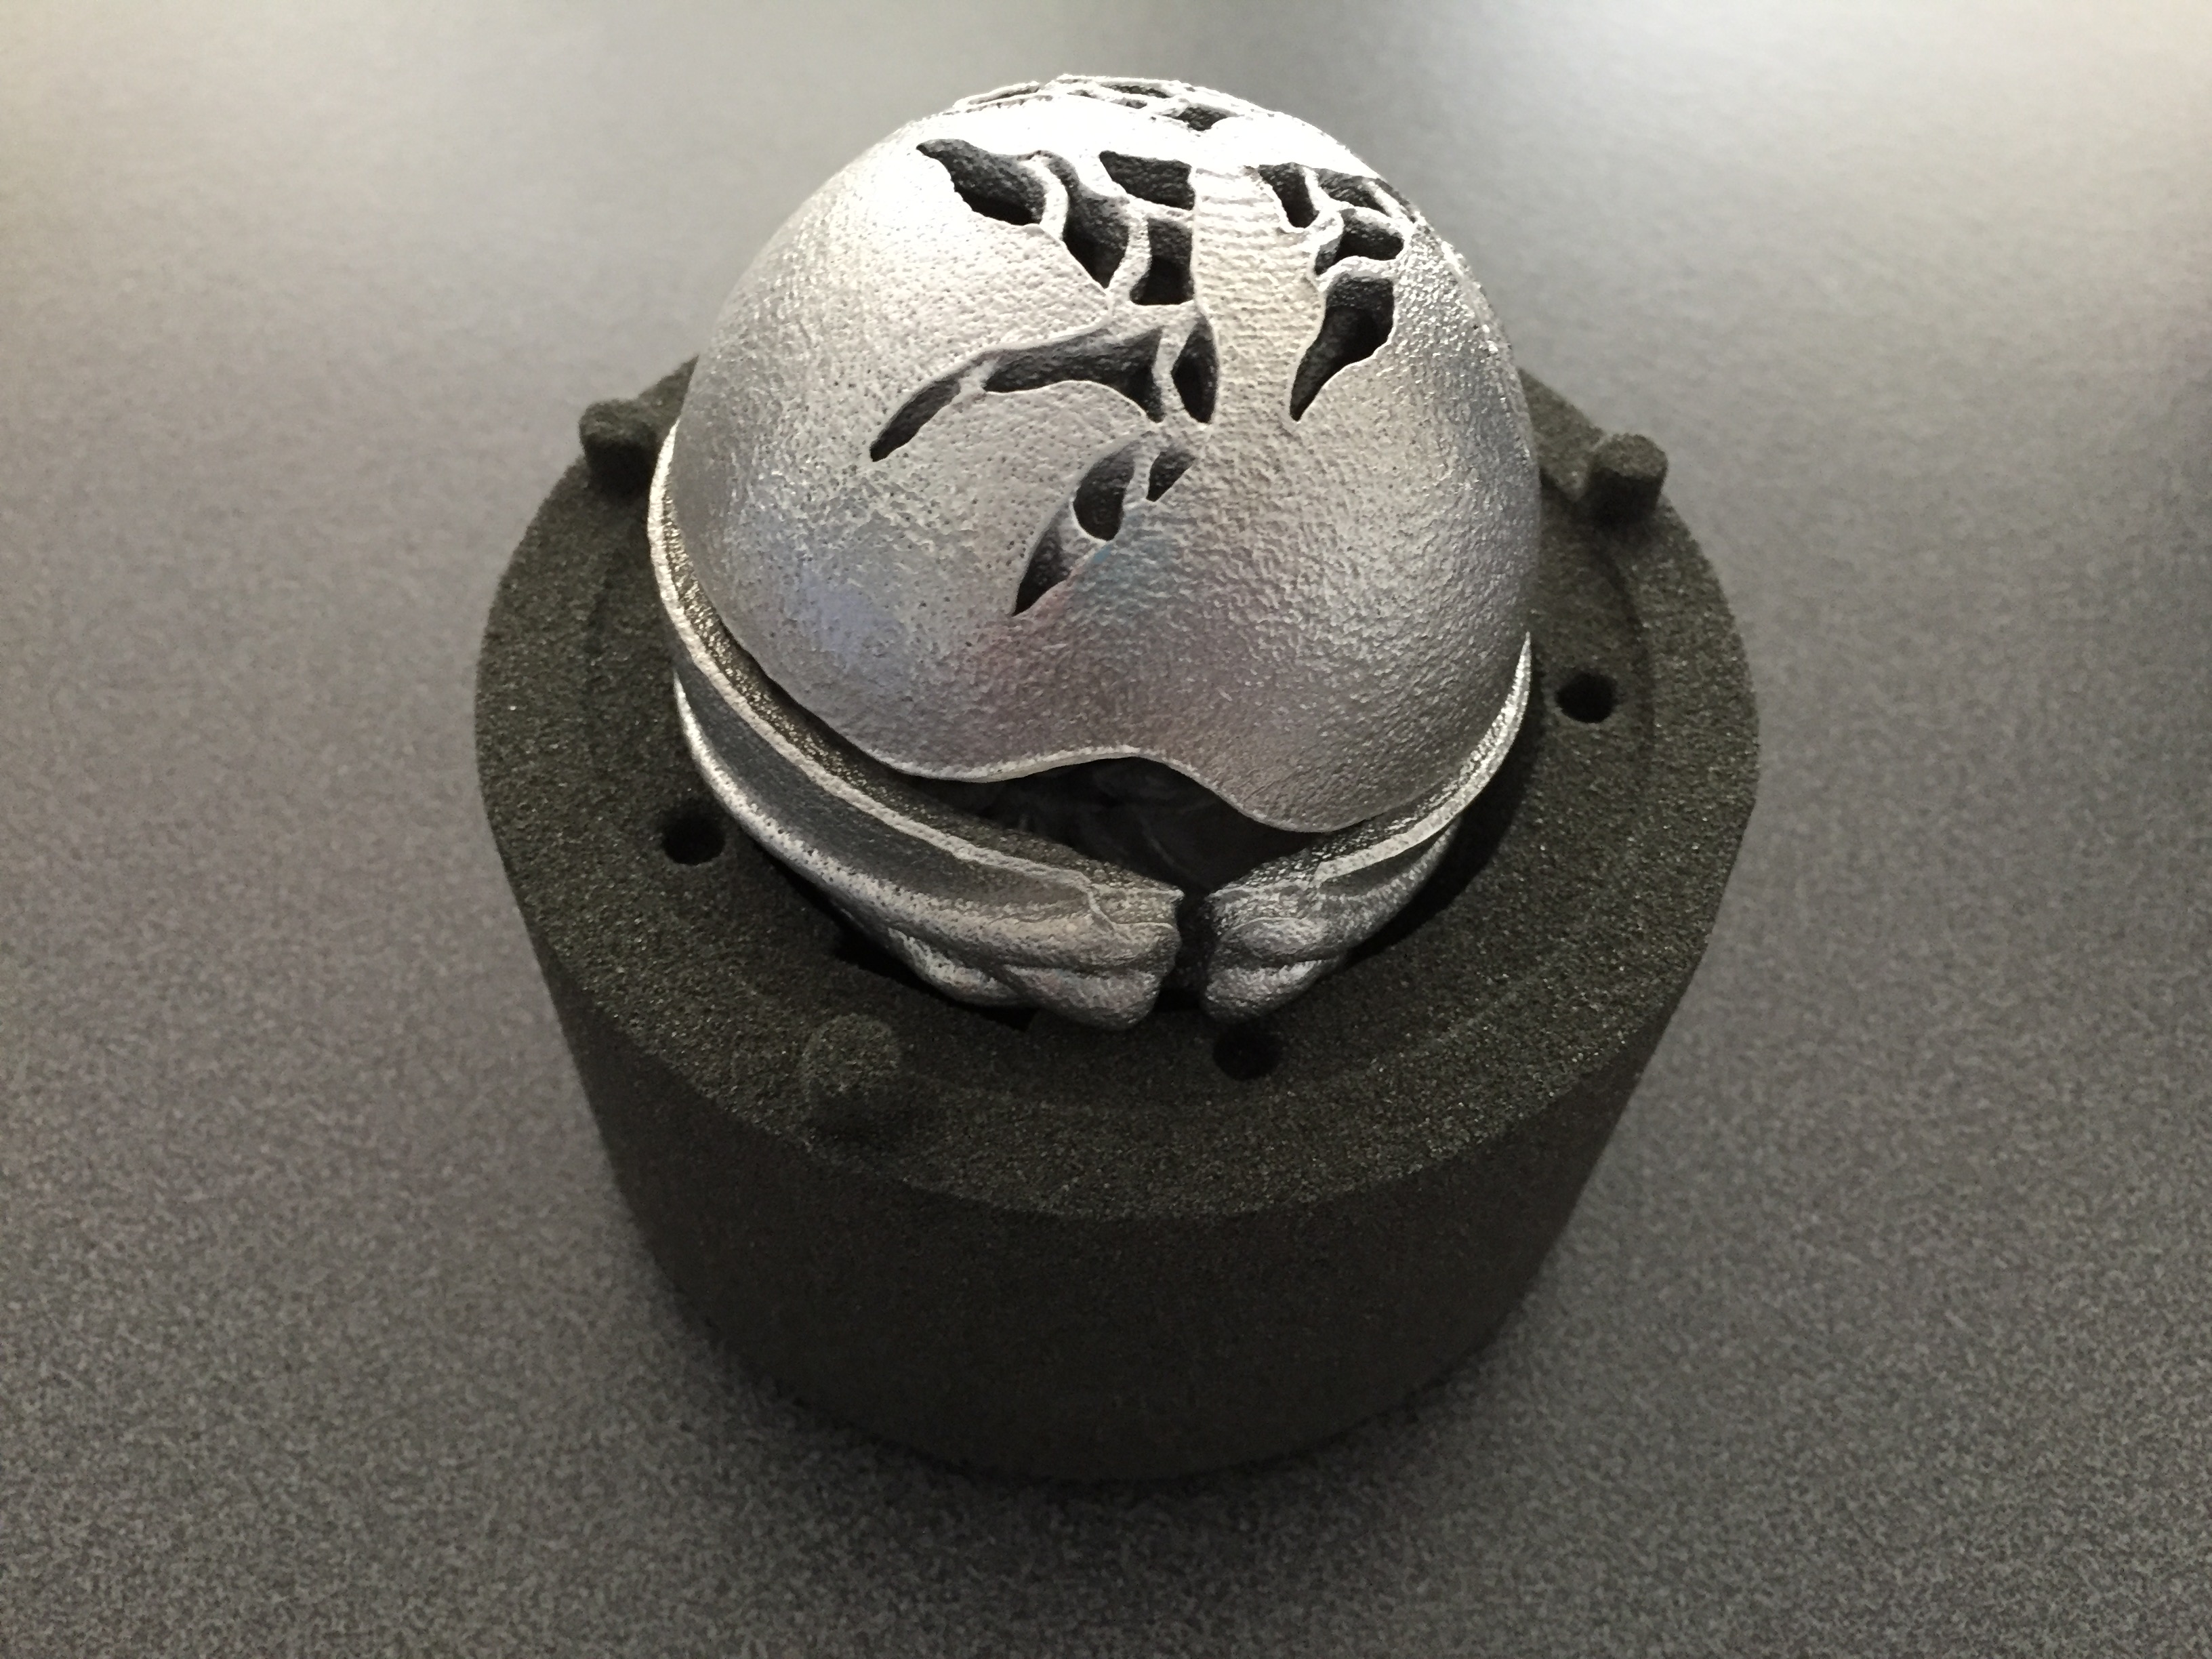 CSIRO Ball sitting on top of the sand mould casting.